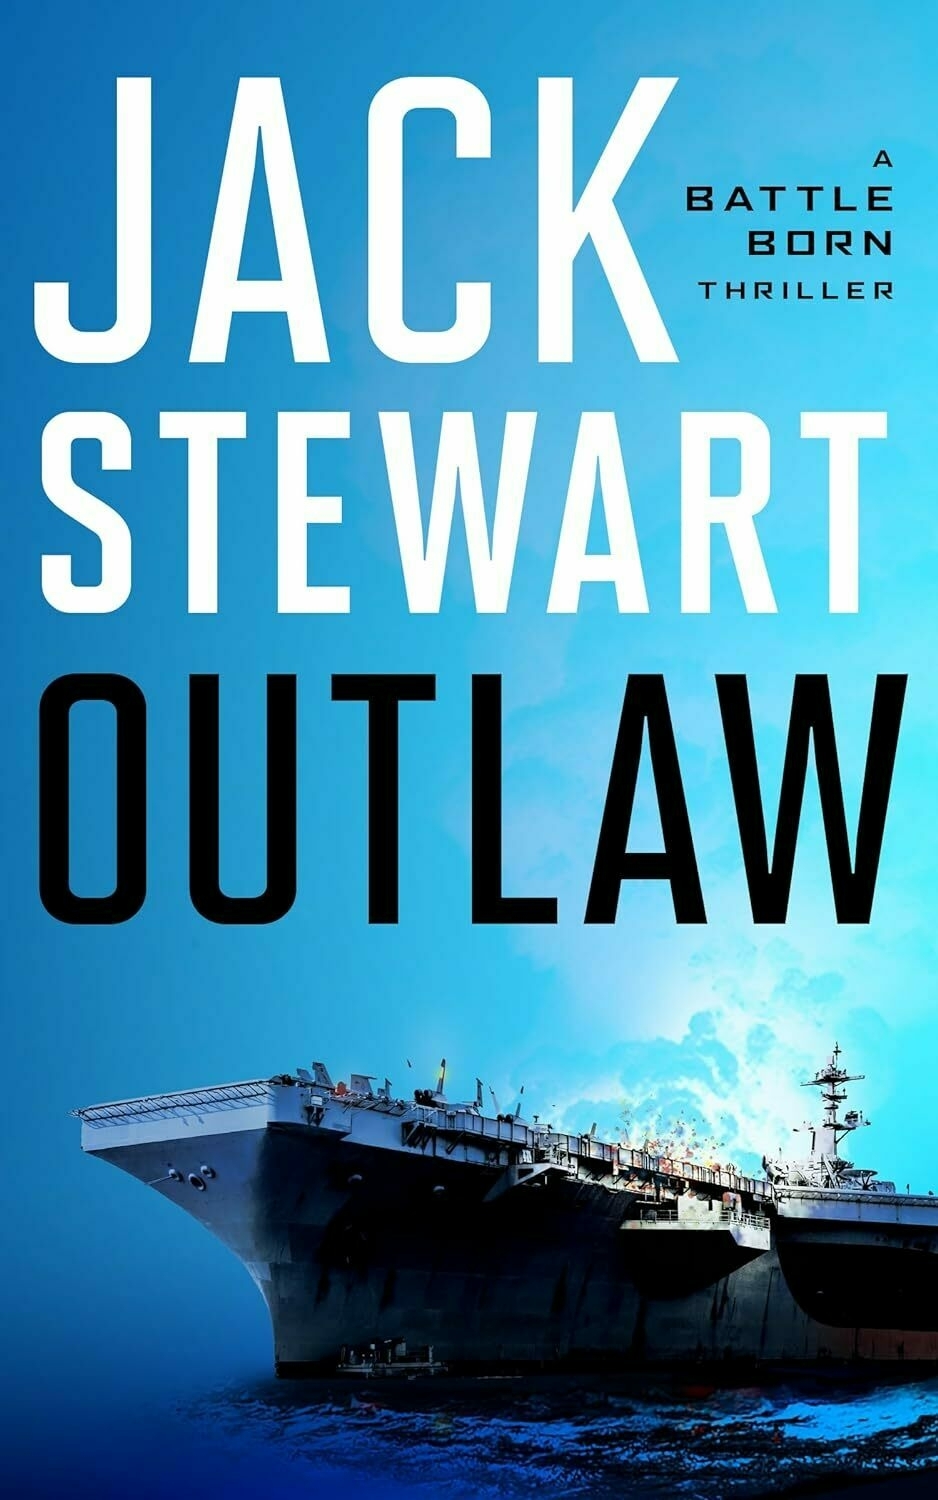 Cover art for Jack Stewart's book Outlaw